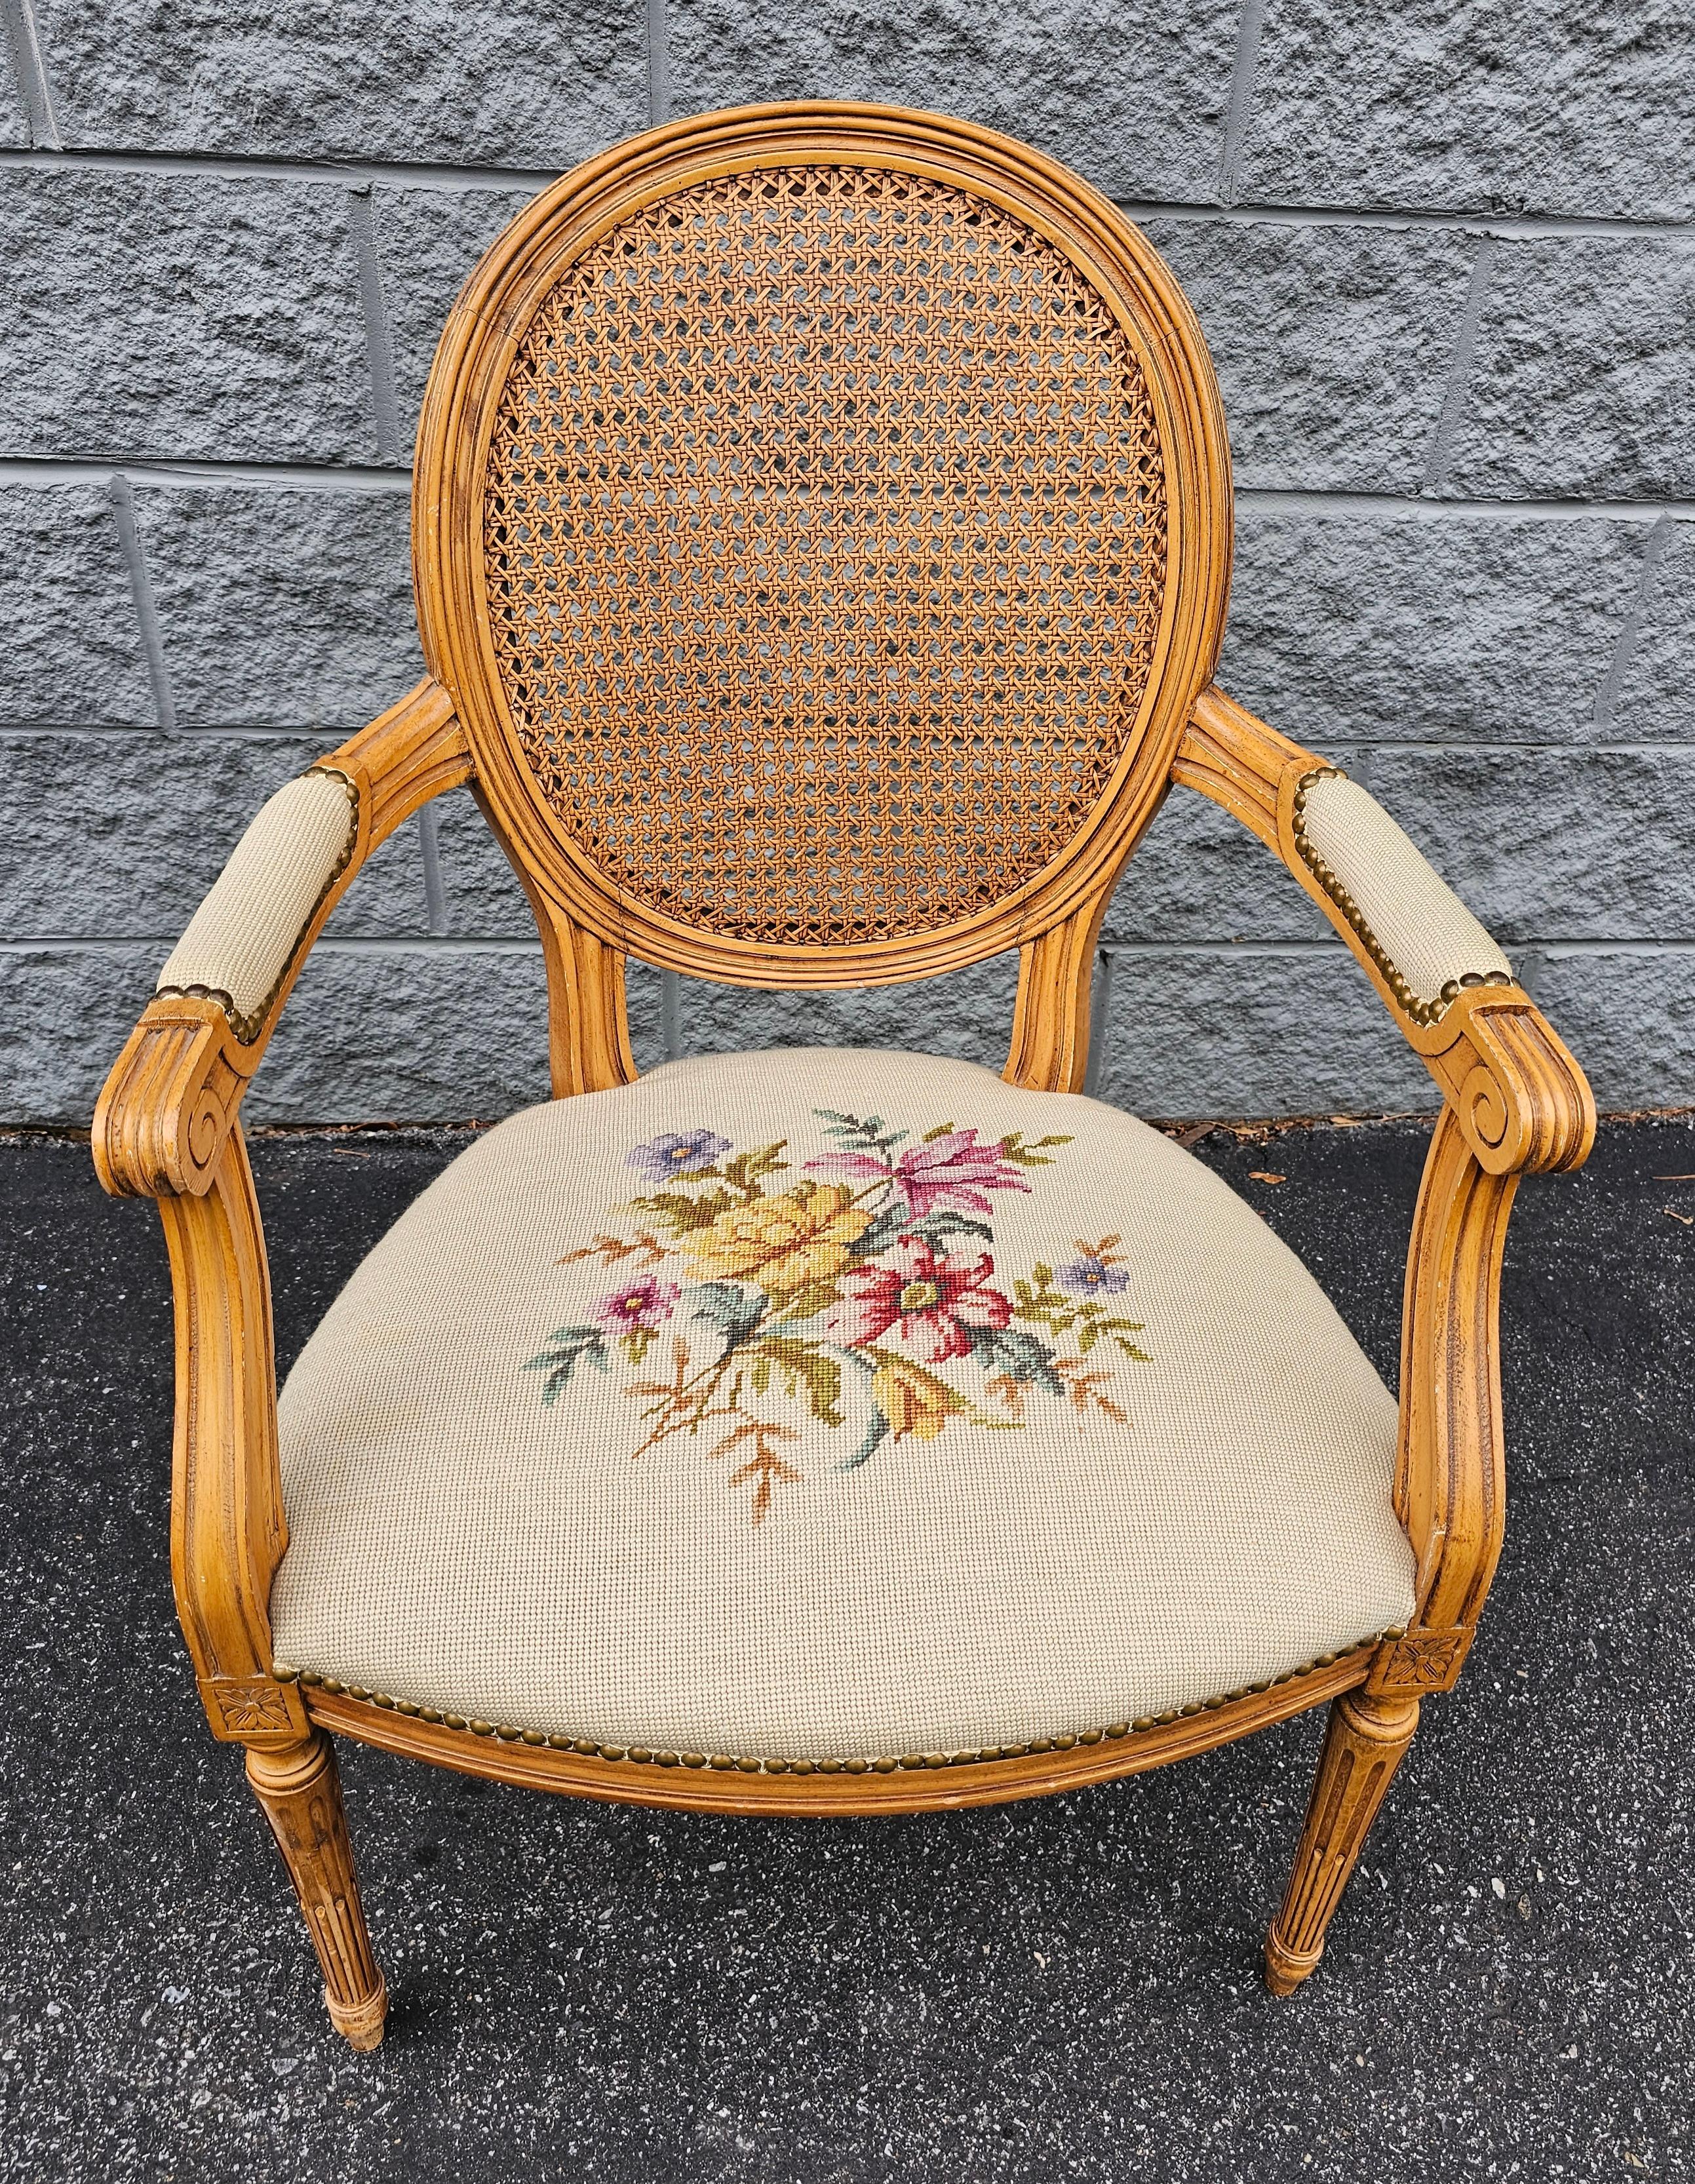 Louis XVI Style Fruitwood, Needlepoint Upholstered Seat And Caned Back Fauteuil For Sale 1